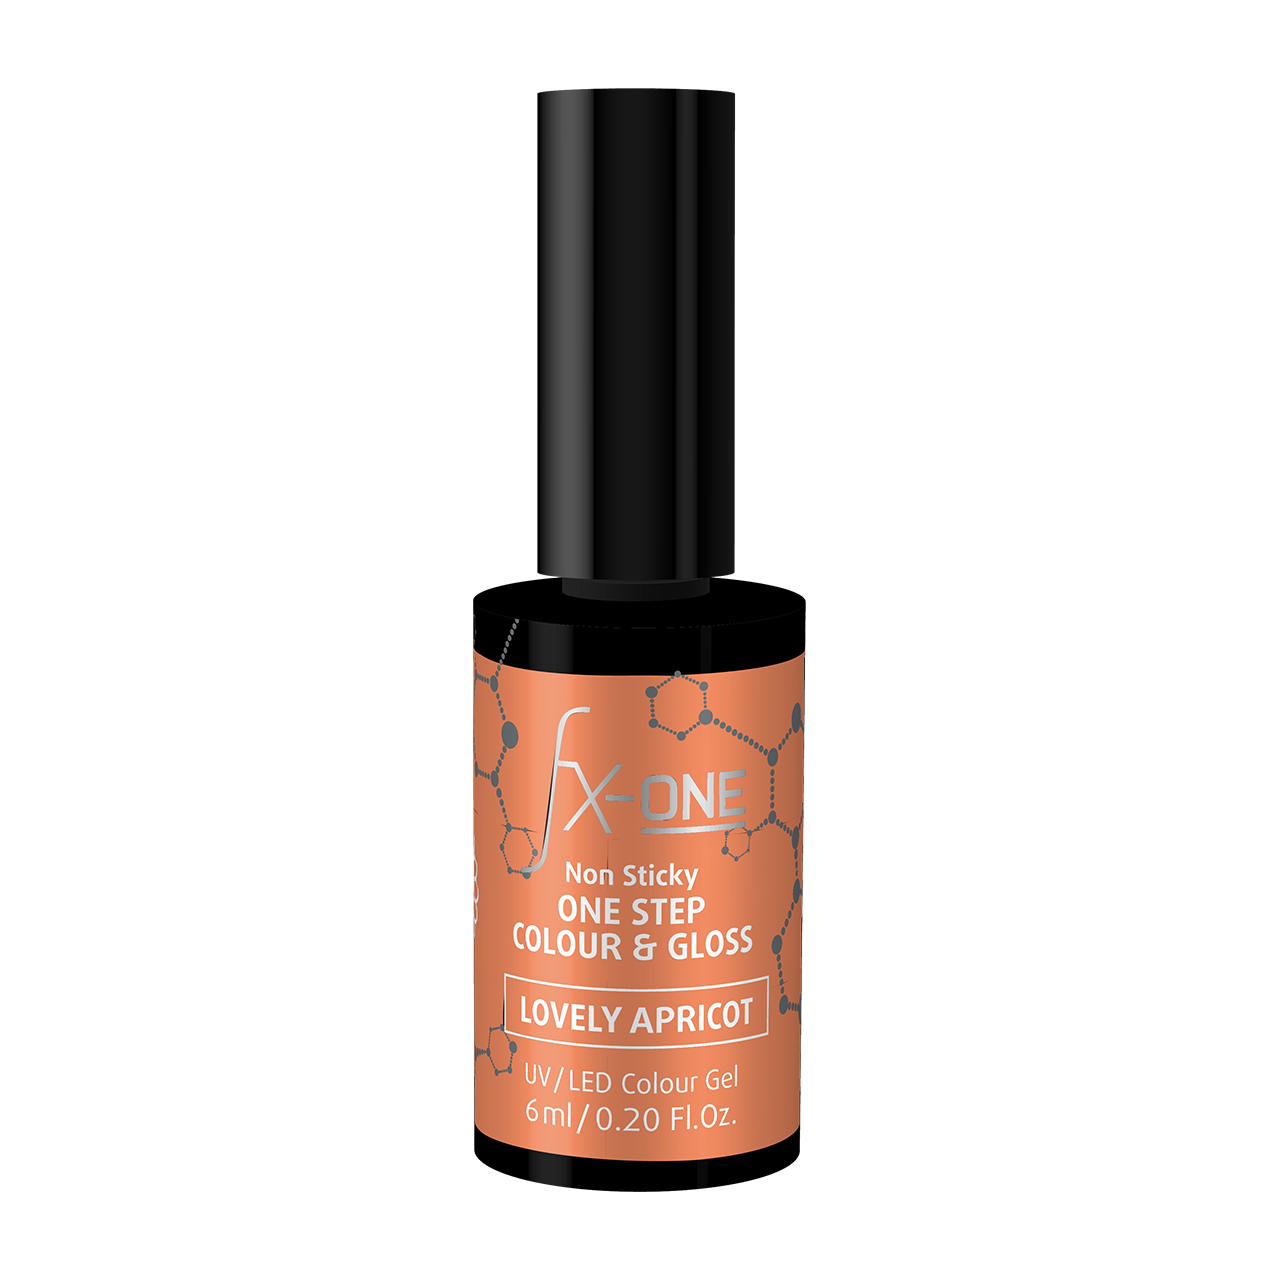 FX-One Colour & Gloss Lovely Apricot